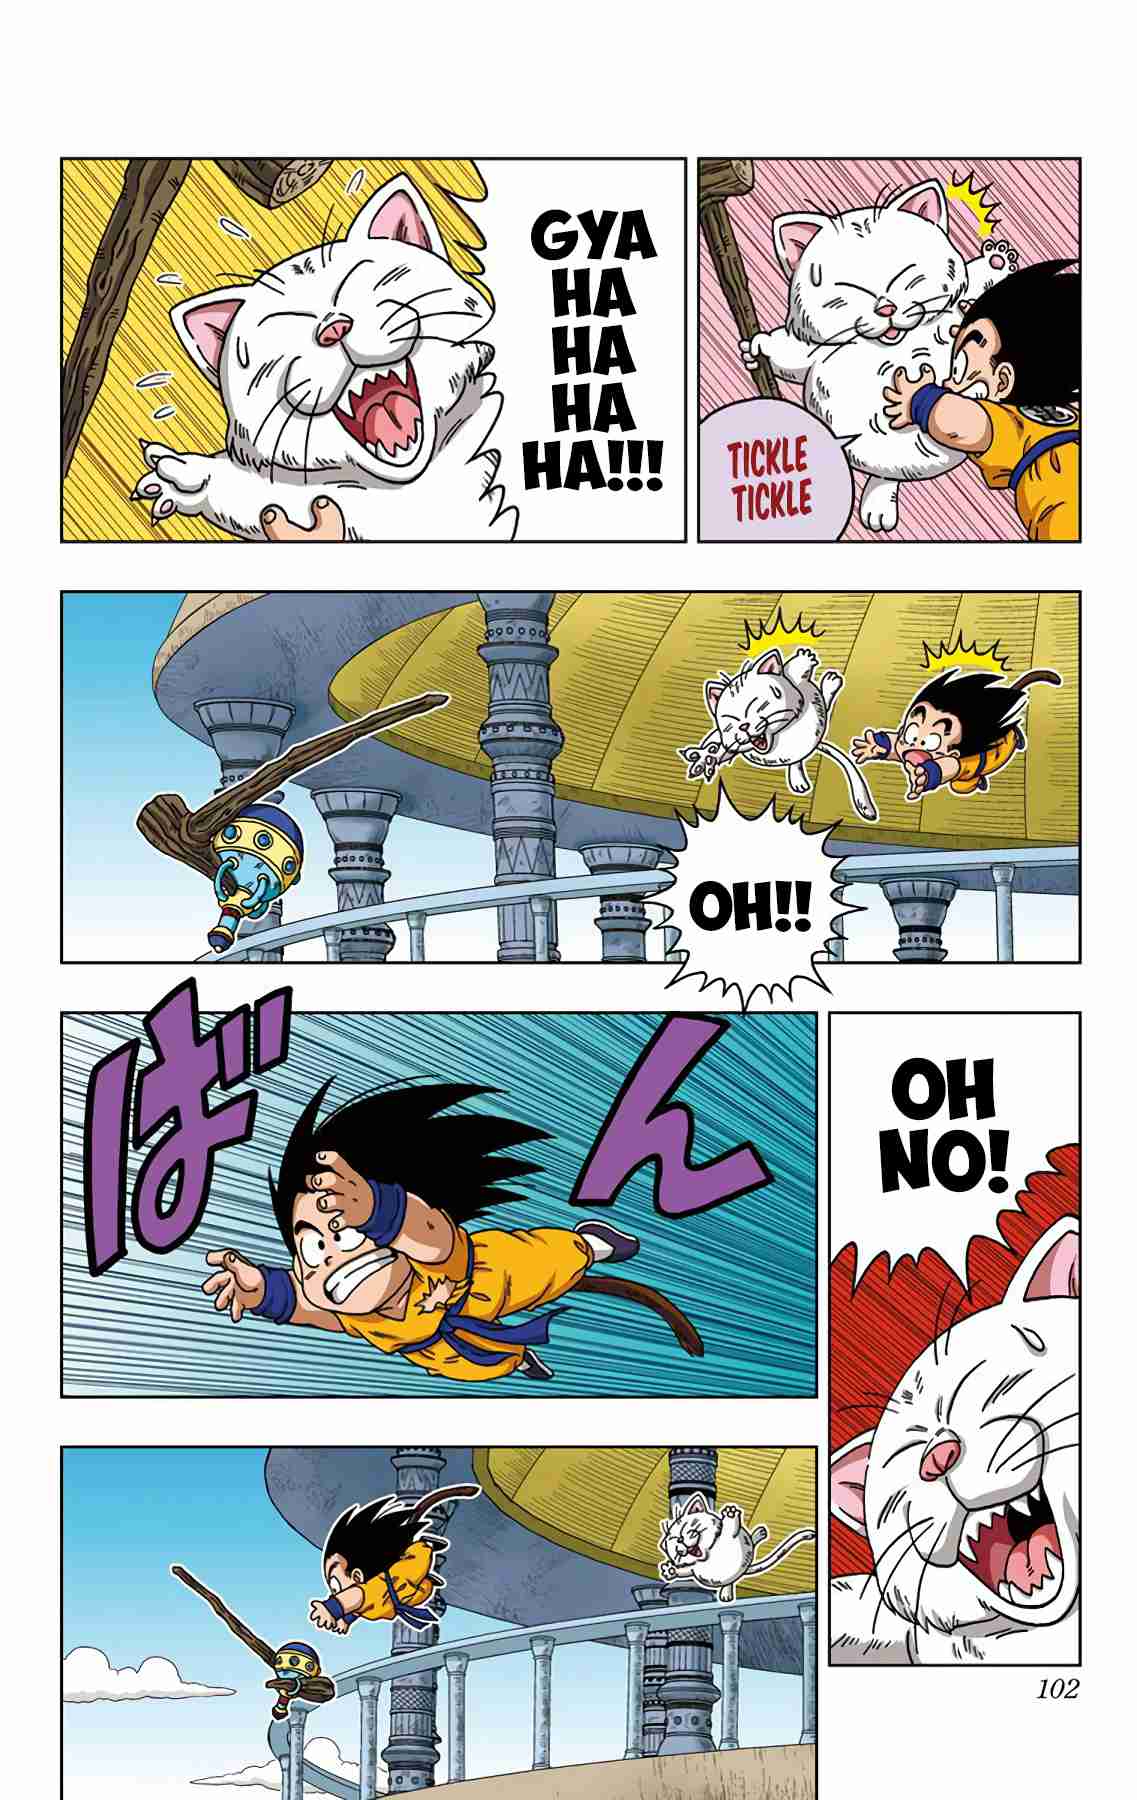 Dragon Ball SD Vol. 3 Ch. 24 Snatch It! The Super Holy Water!